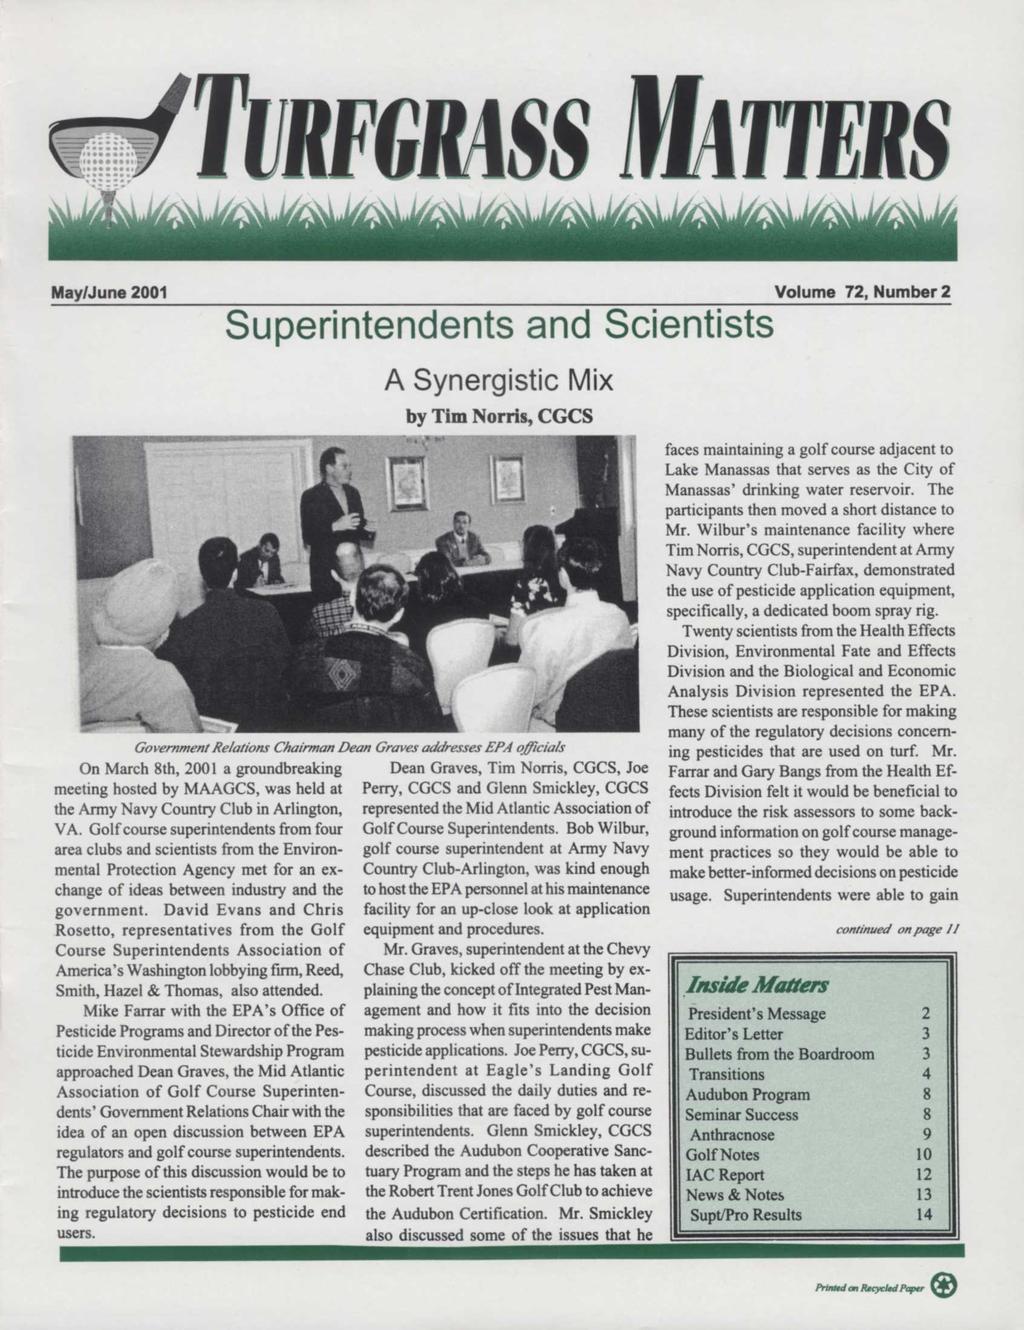 J/j\si U/^Jí JA May/June 2001 Volume 72, Number 2 Superintendents and Scientists A Synergistic Mix by Tim Norris, CGCS Government Relations Chairman Dean Graves addresses EPA officials On March 8th,